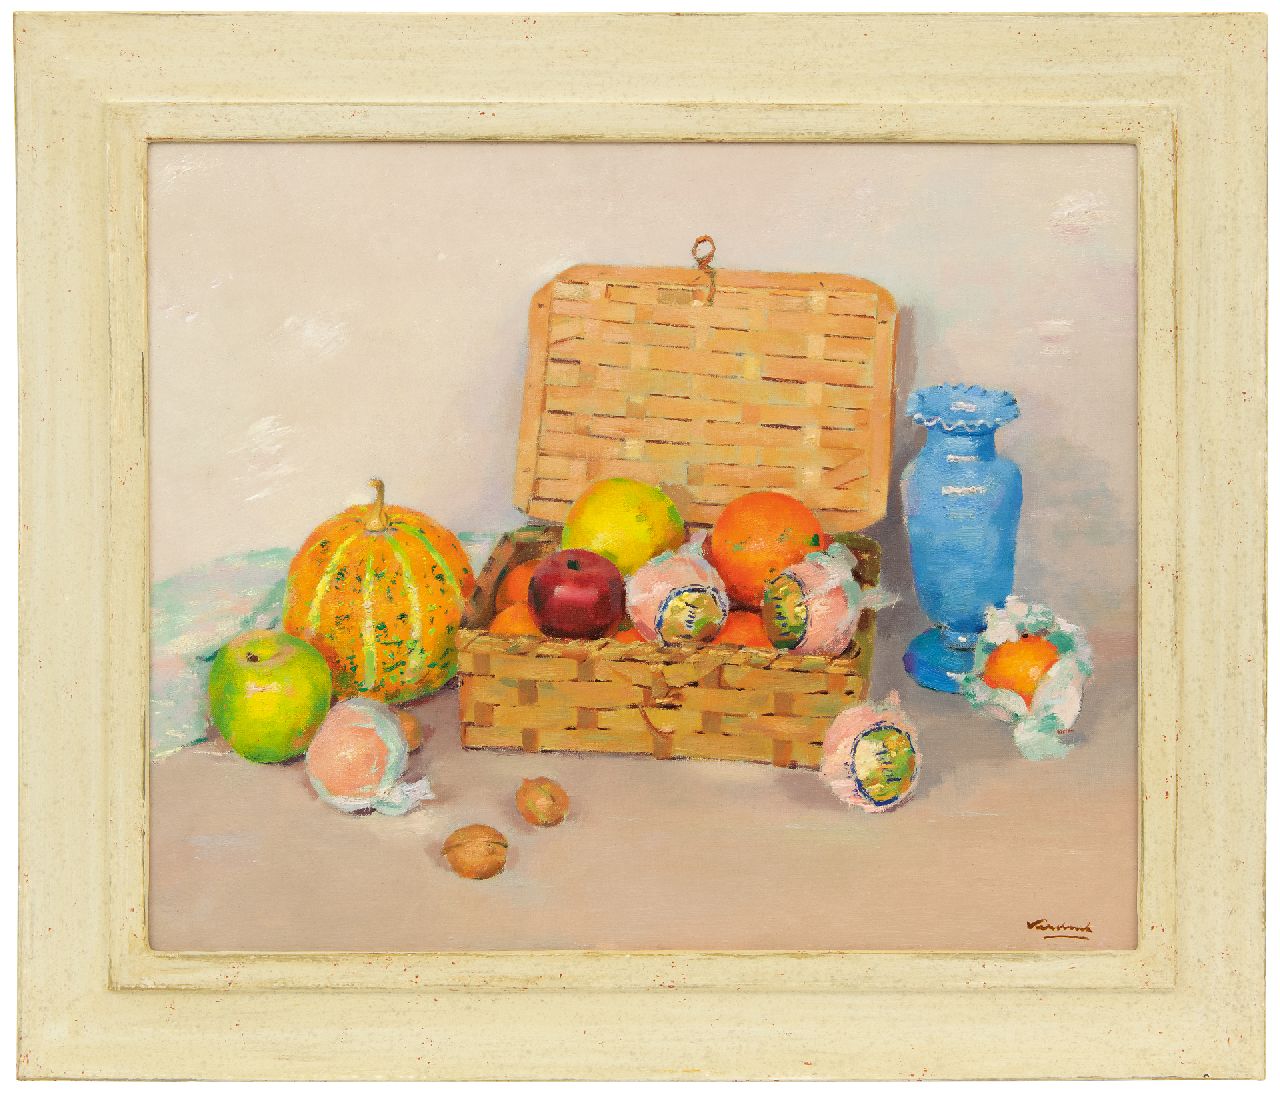 Verdonk F.W.  | Frederik Willem 'Frits' Verdonk | Paintings offered for sale | Still life with a fruit basket, oil on canvas laid down on board 46.0 x 56.0 cm, signed l.r.